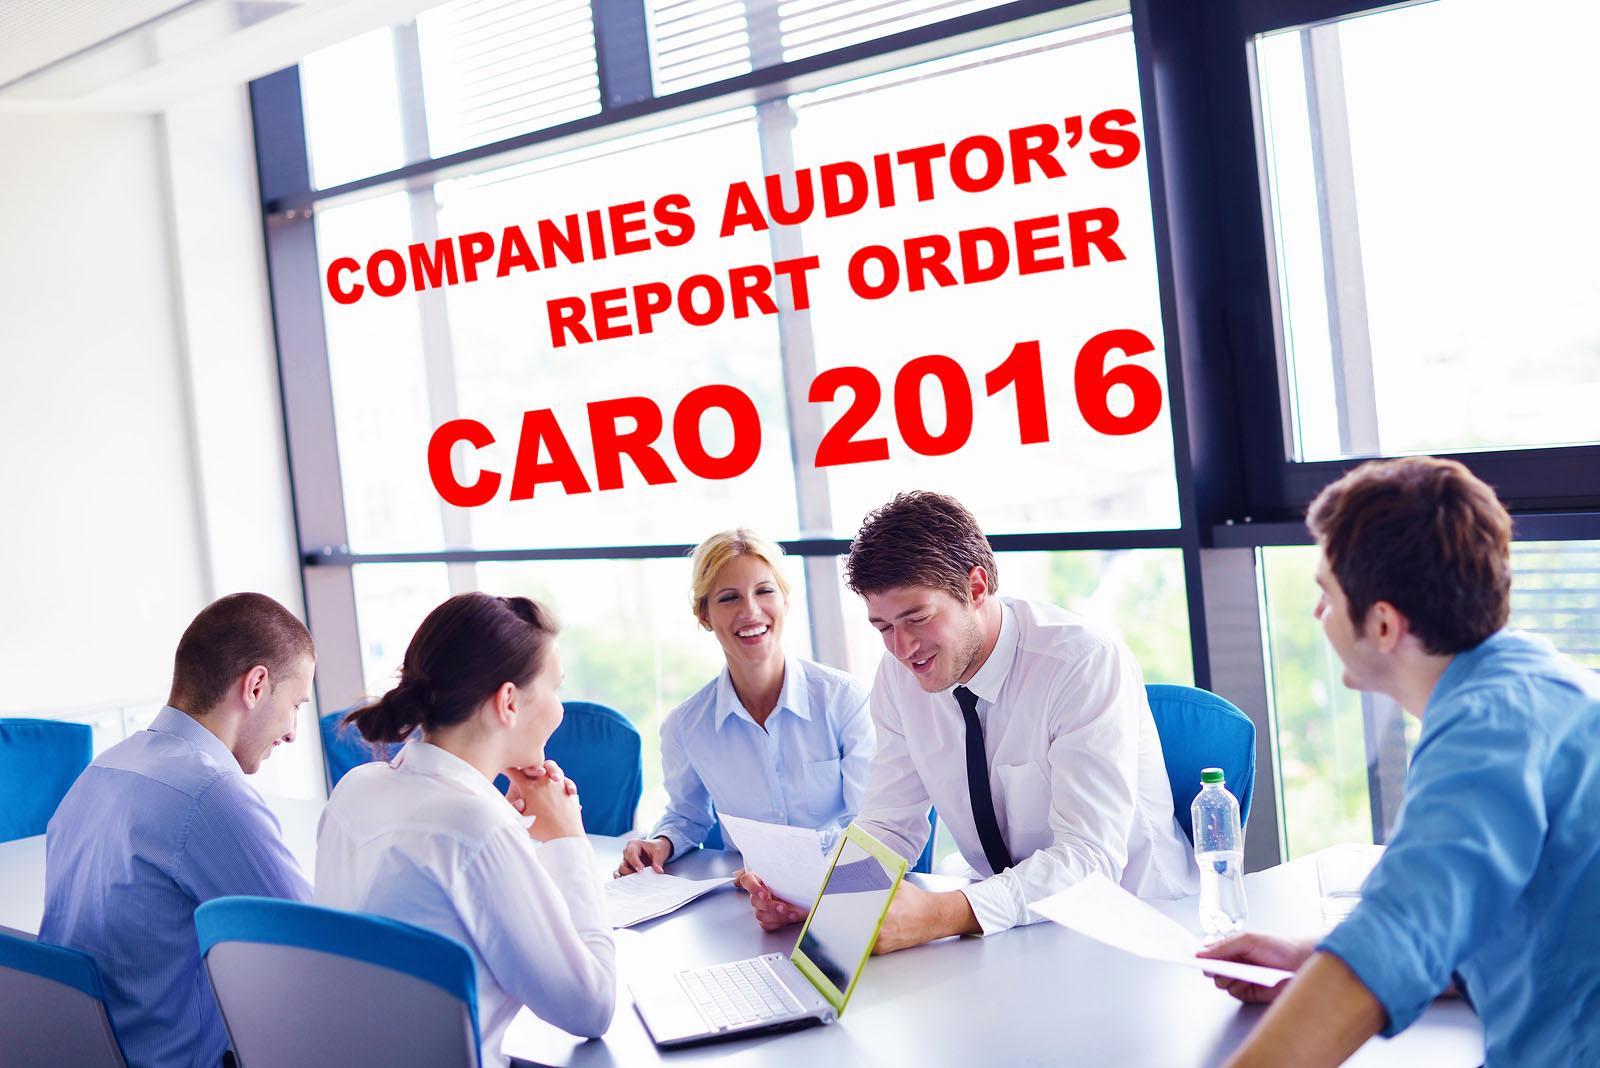 THE COMPANIES AUDITORâ€™S REPORT ORDER-CARO 2016